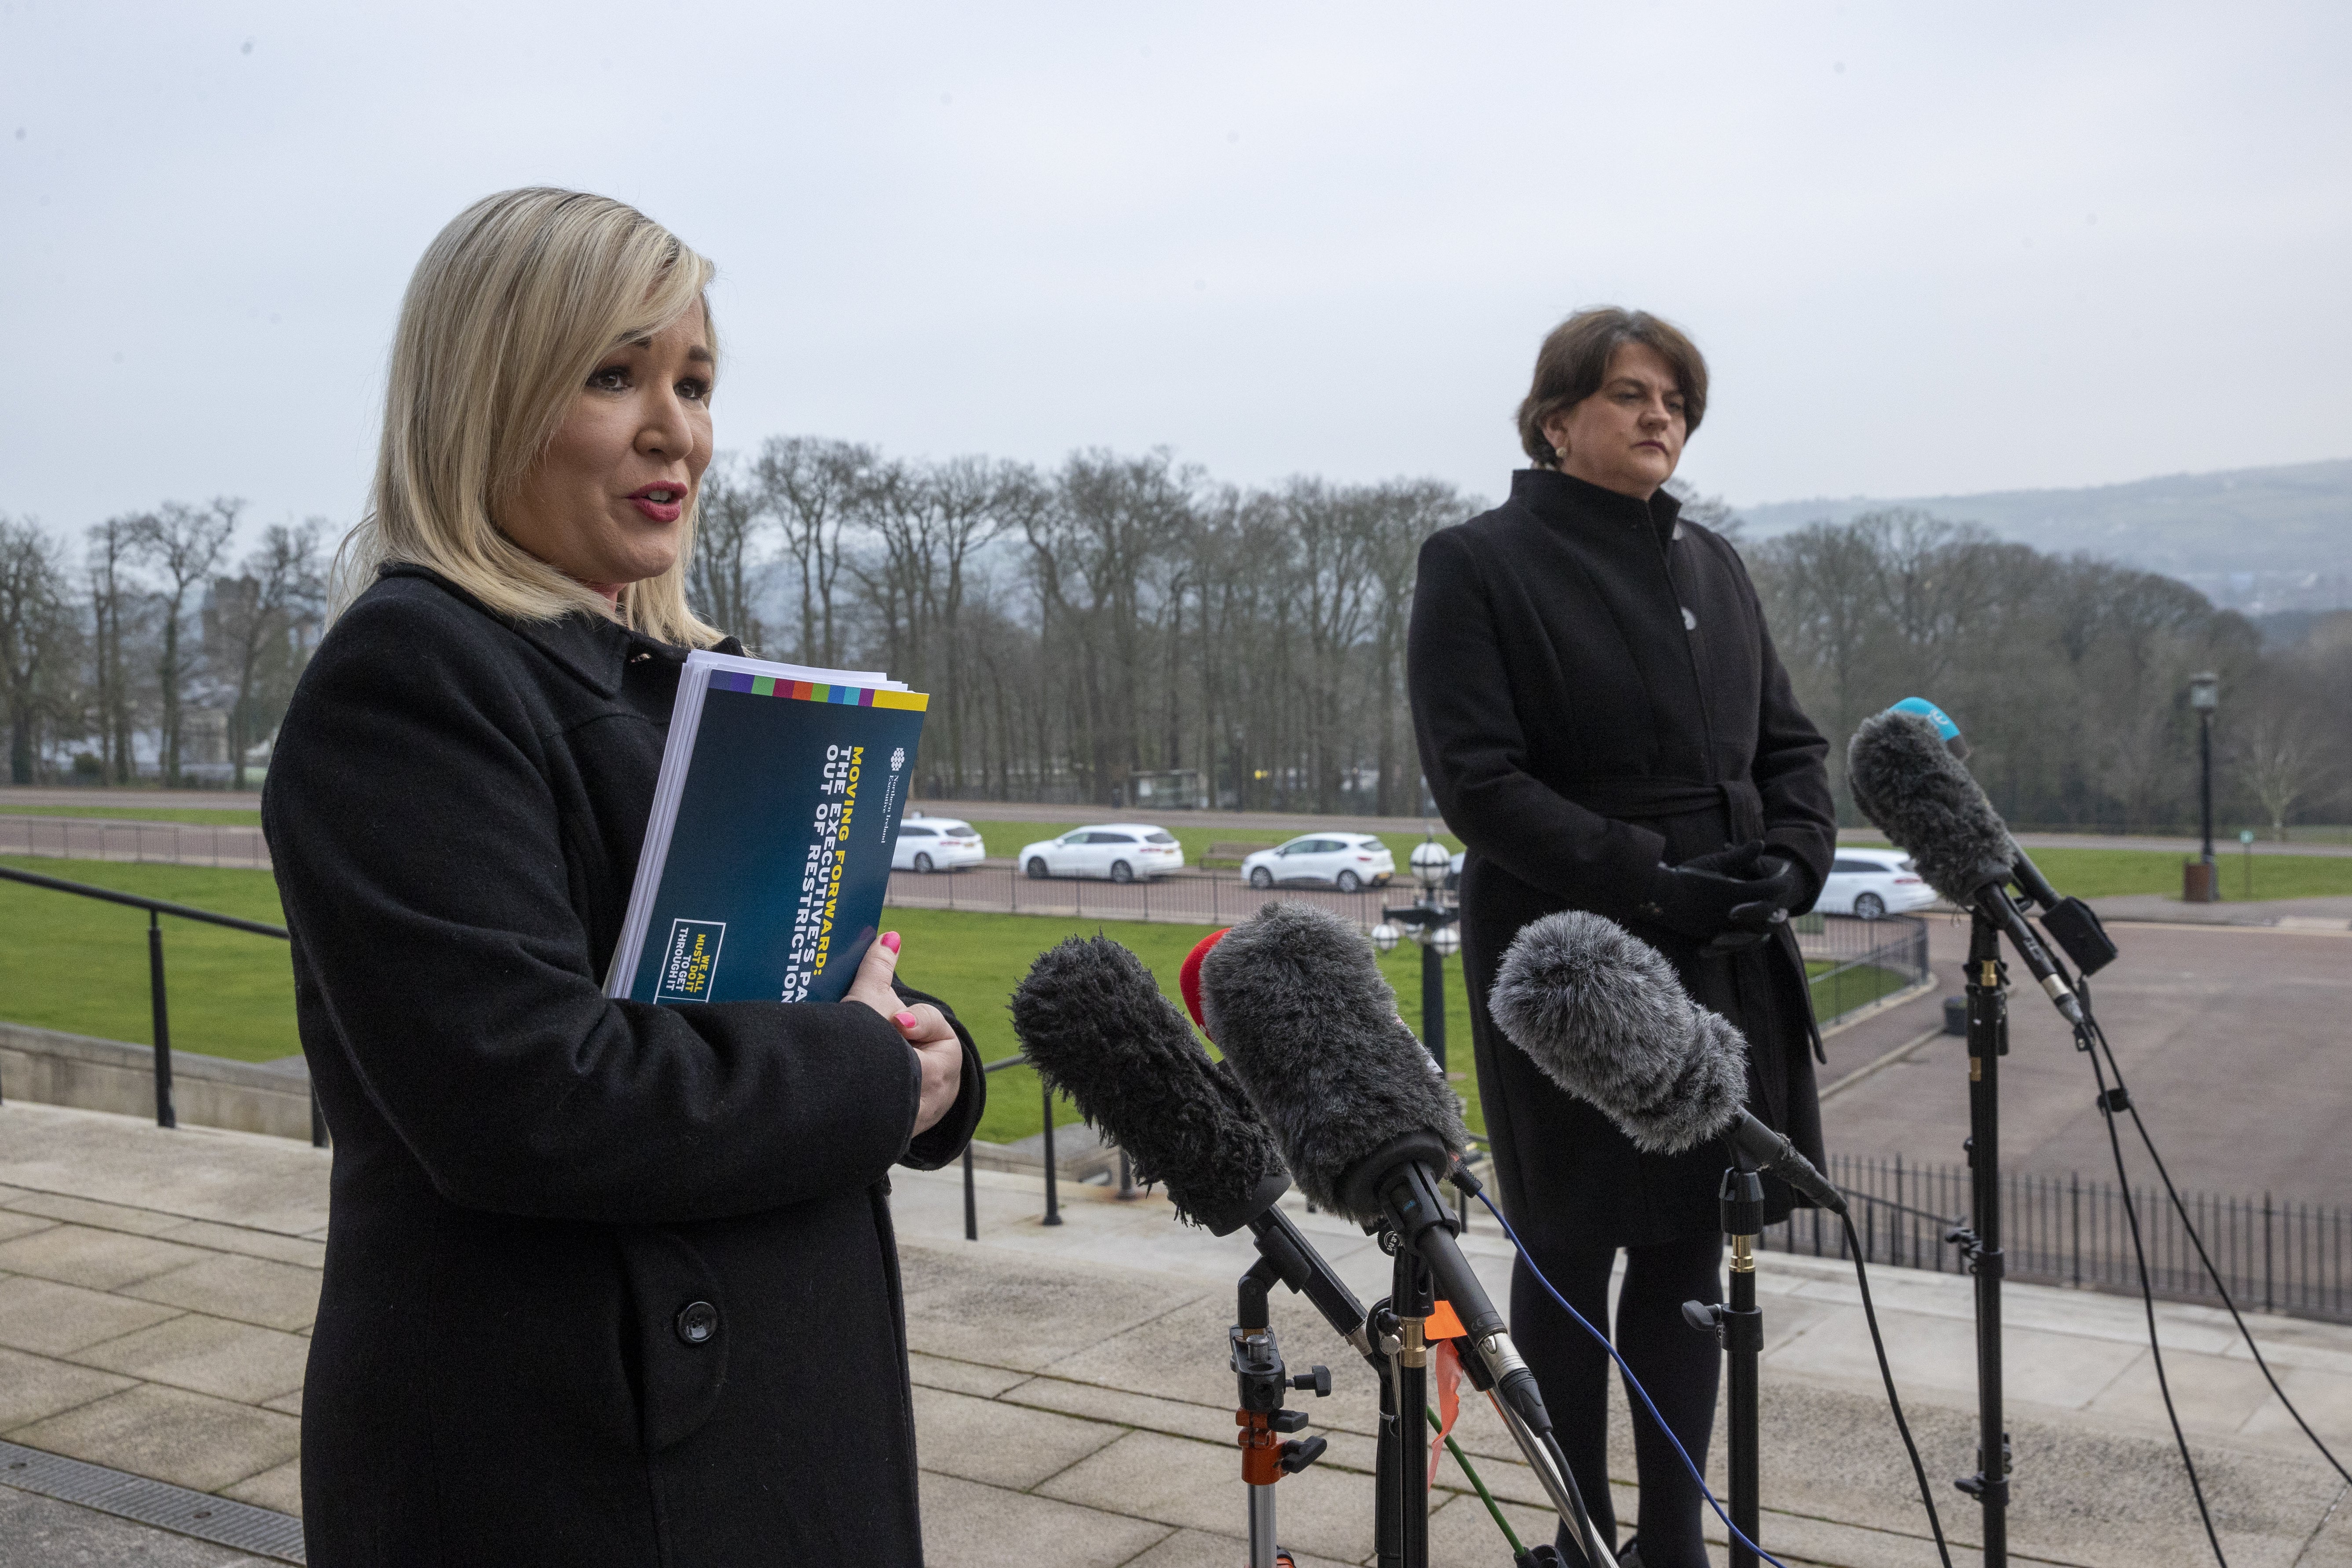 Michelle O’Neill and Arlene Foster defended the plan, saying they want to take a ‘cautious’ approach to lifting restrictions